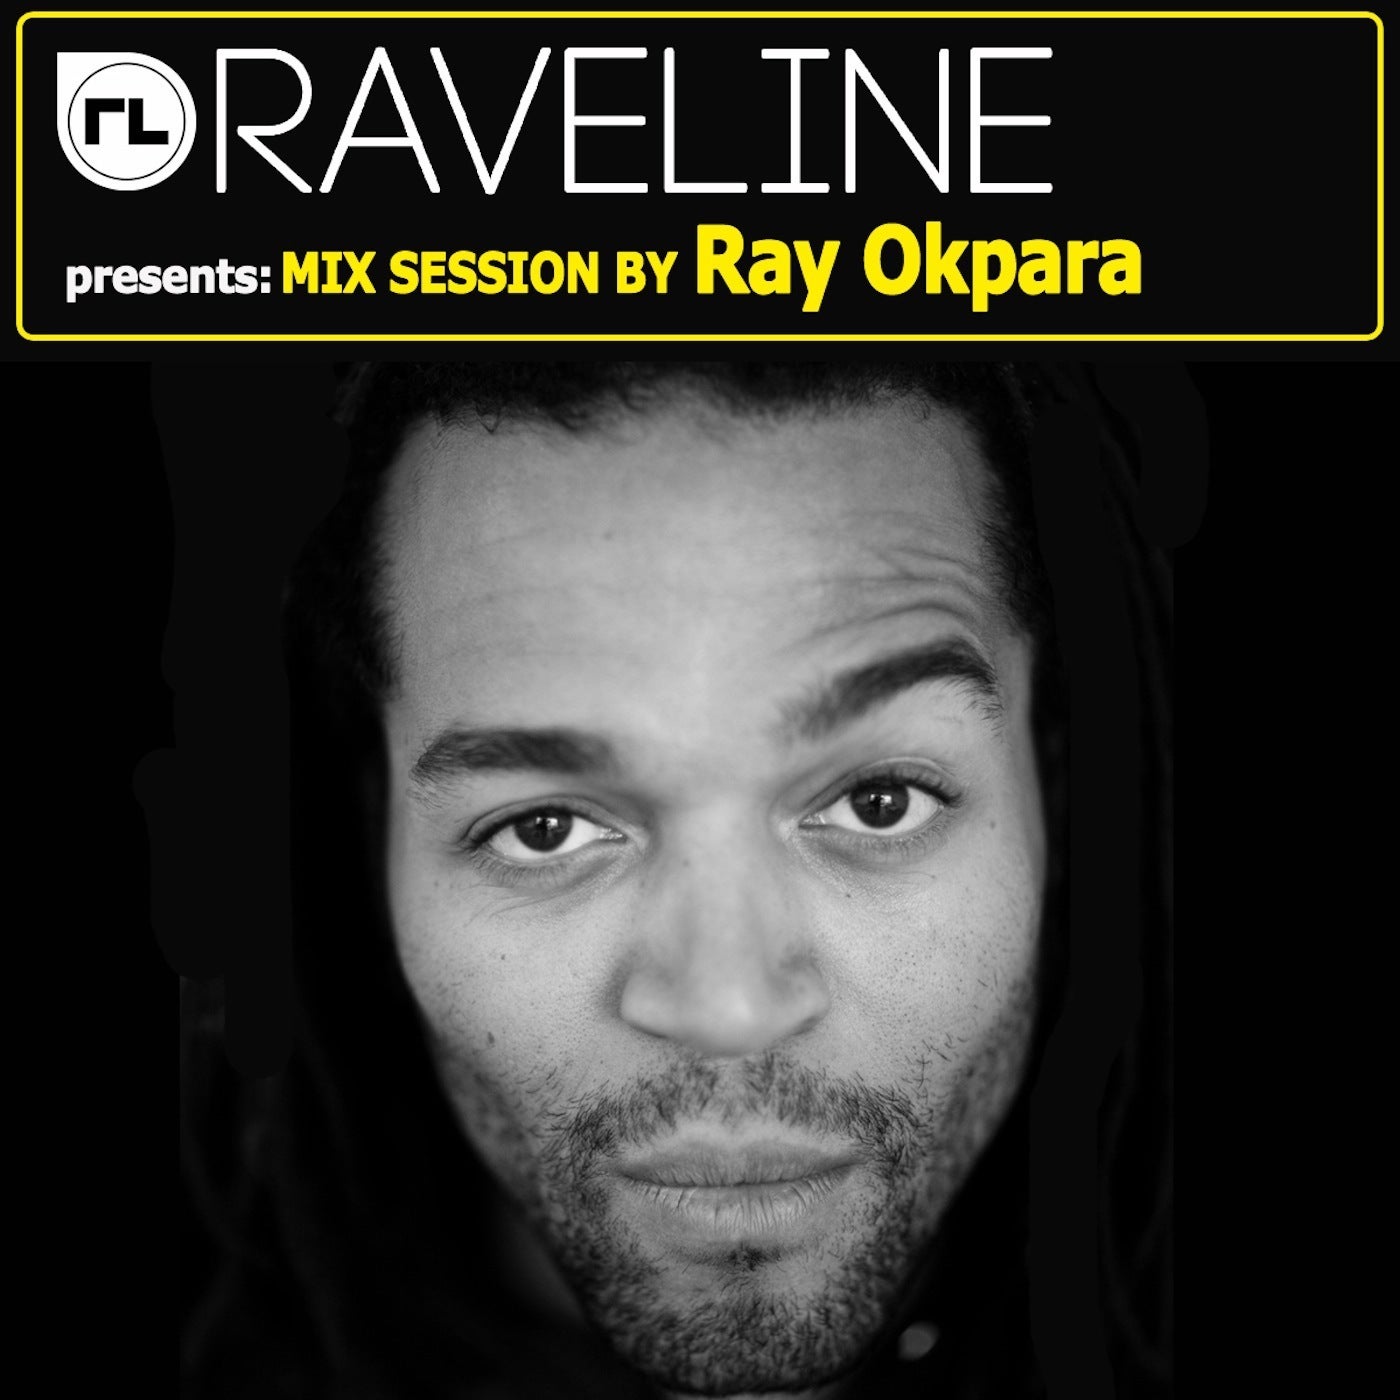 Raveline Mix Session By Ray Okpara